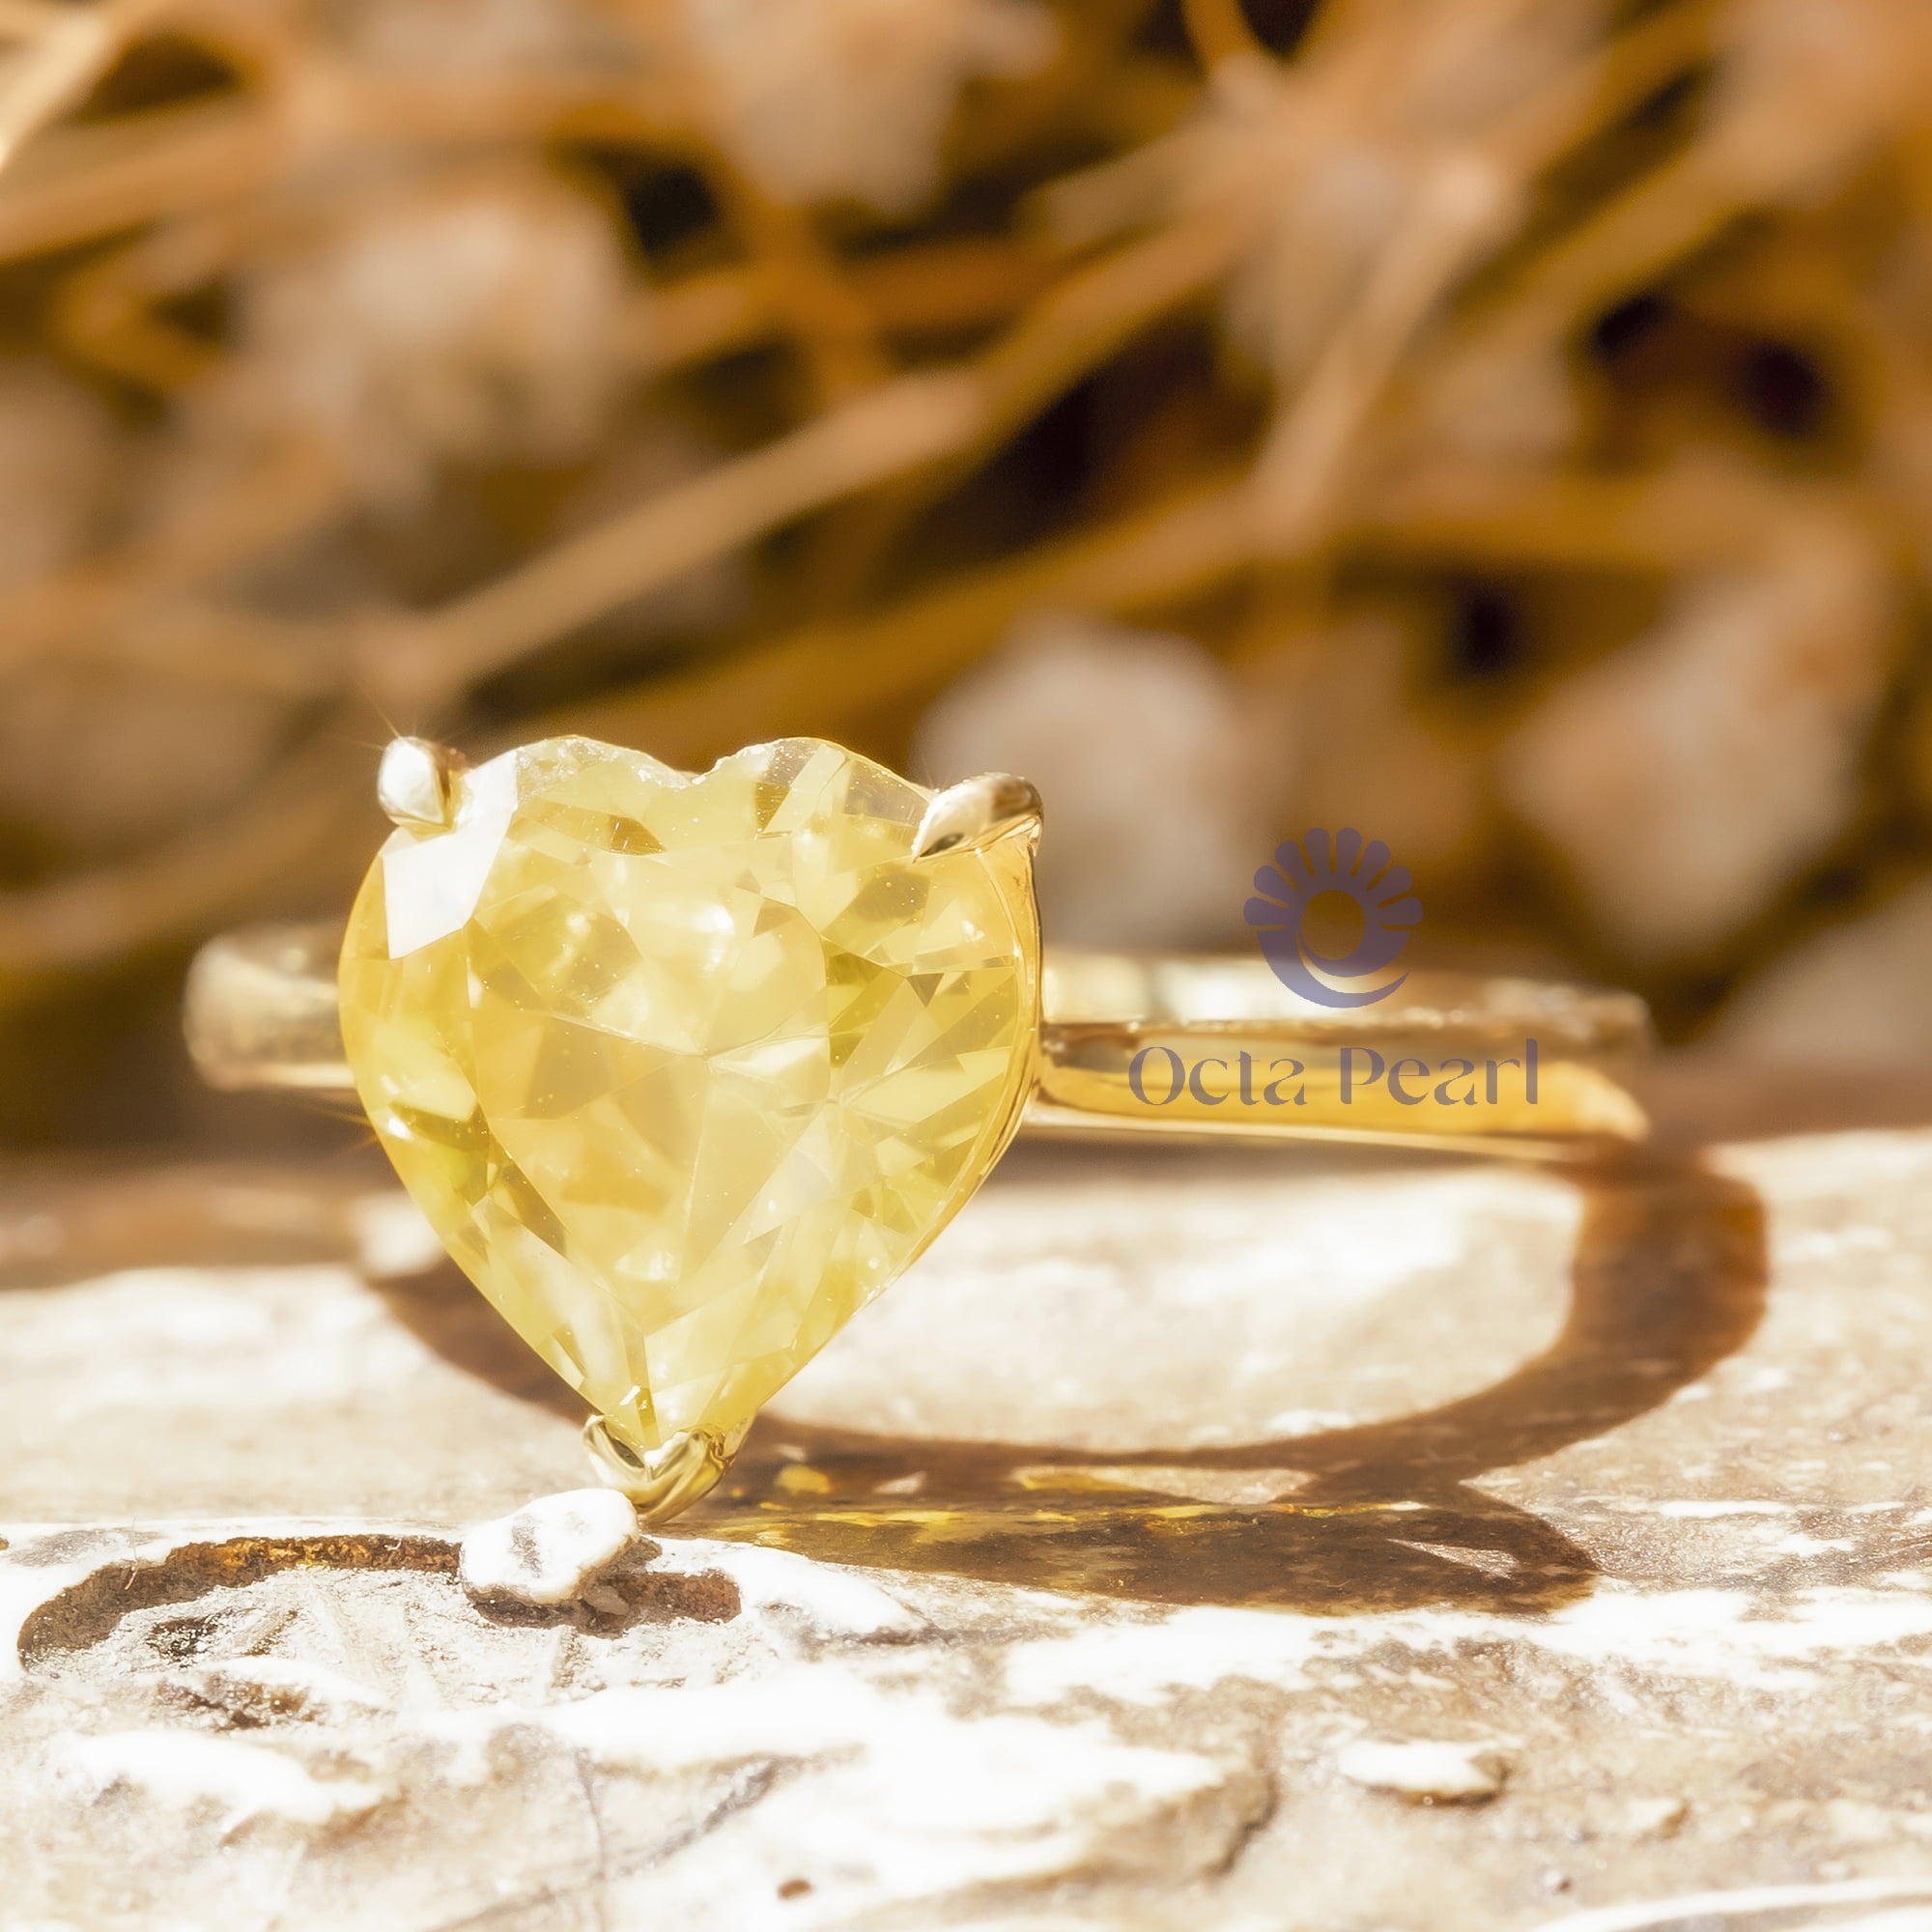 3-Prong Set Canary Yellow Heart Cut CZ Stone Solitaire Engagement Wedding Ring (3 1/2 TCW)